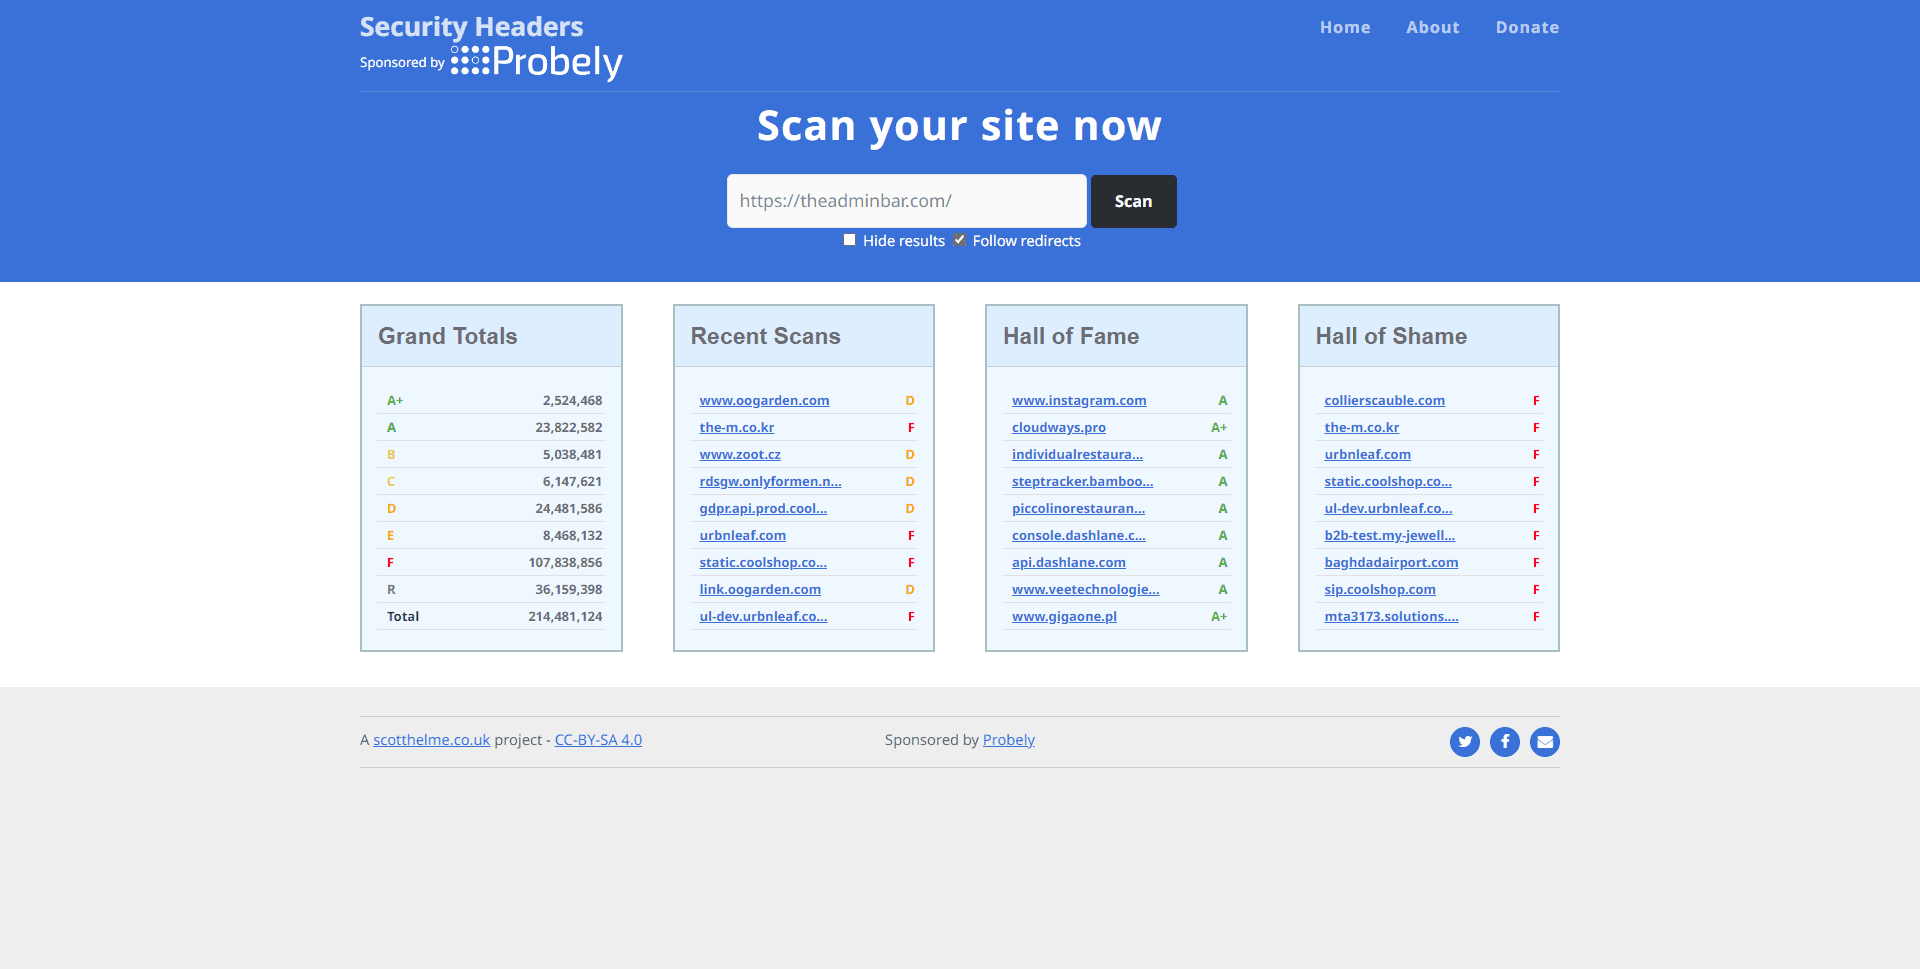 A screenshot of the Security Headers home page